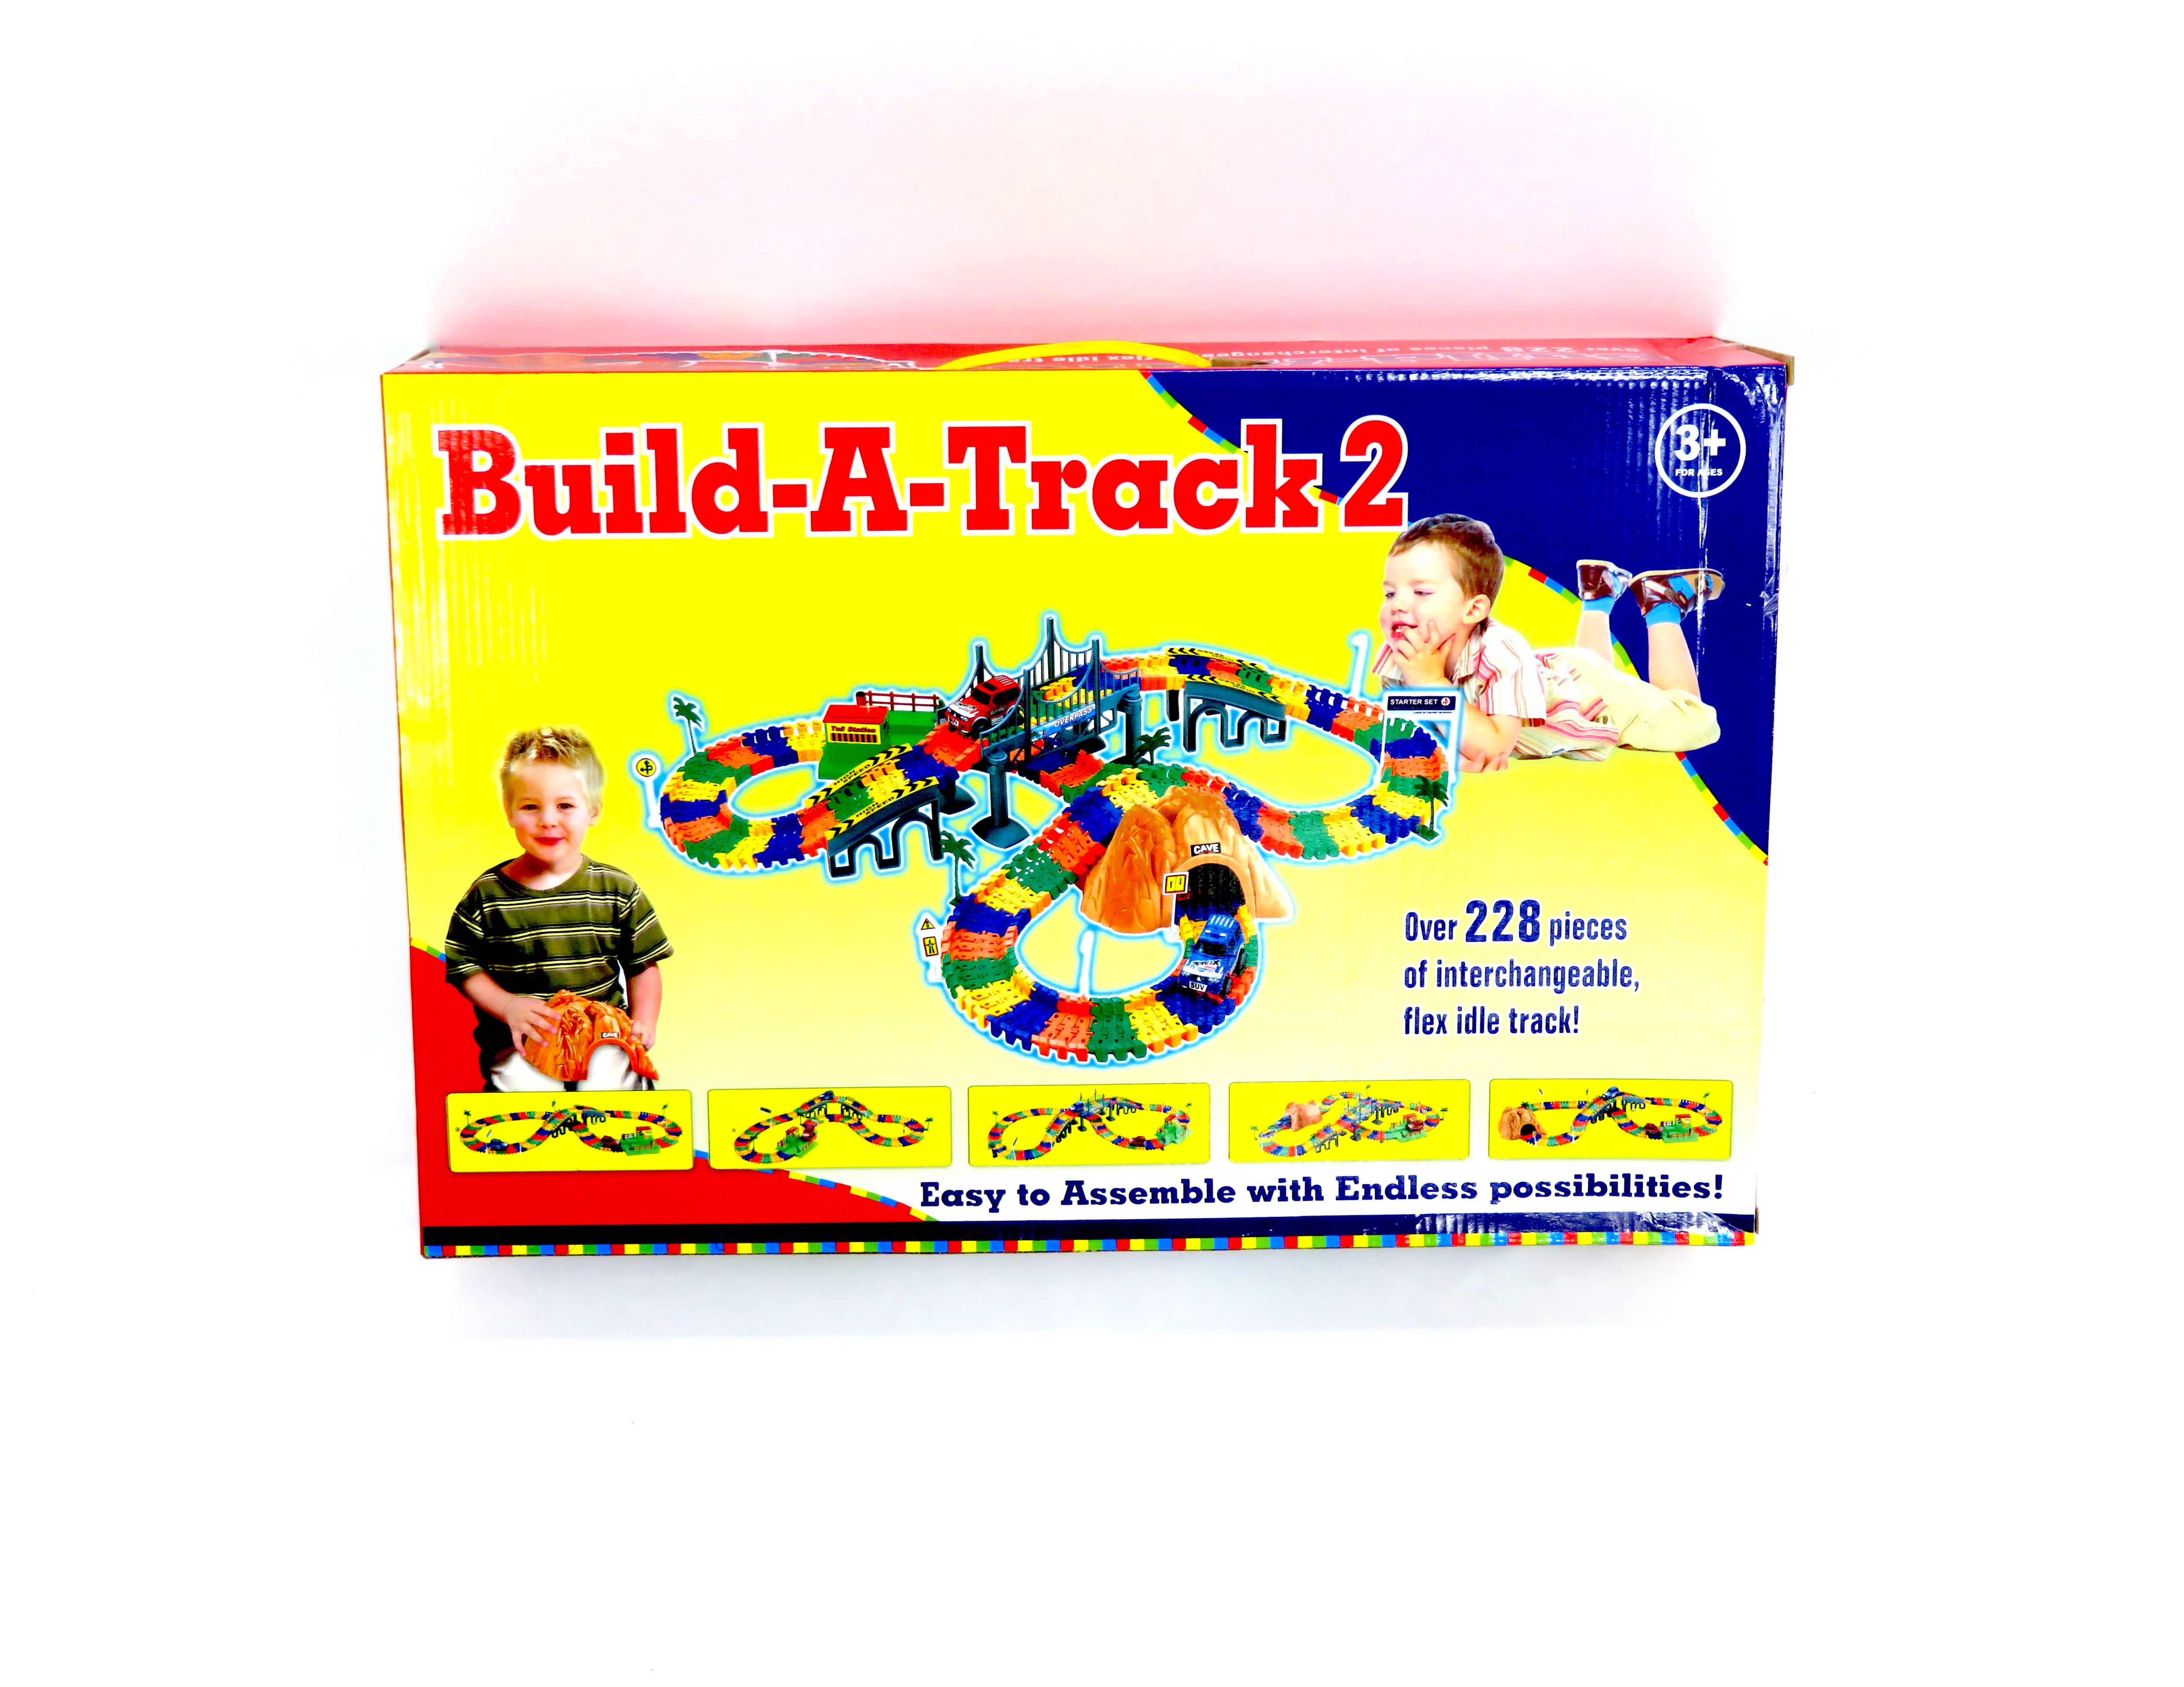 Build-A-Track 2